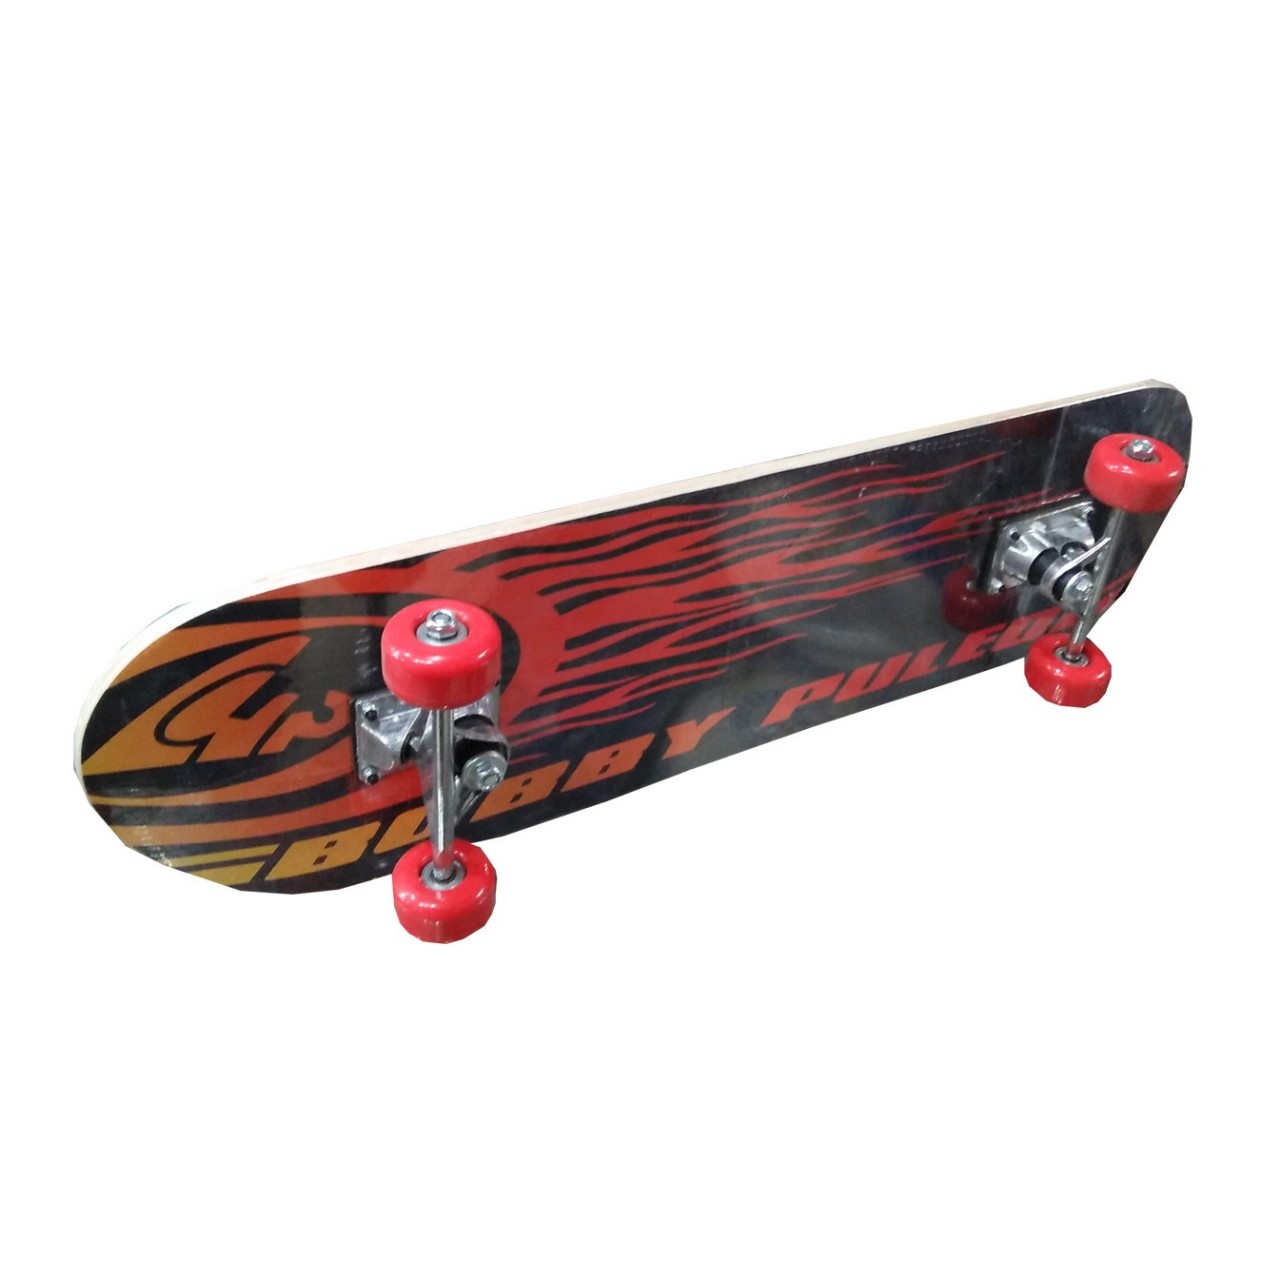 Extra-Large Size Skateboard For Outdoor Sports